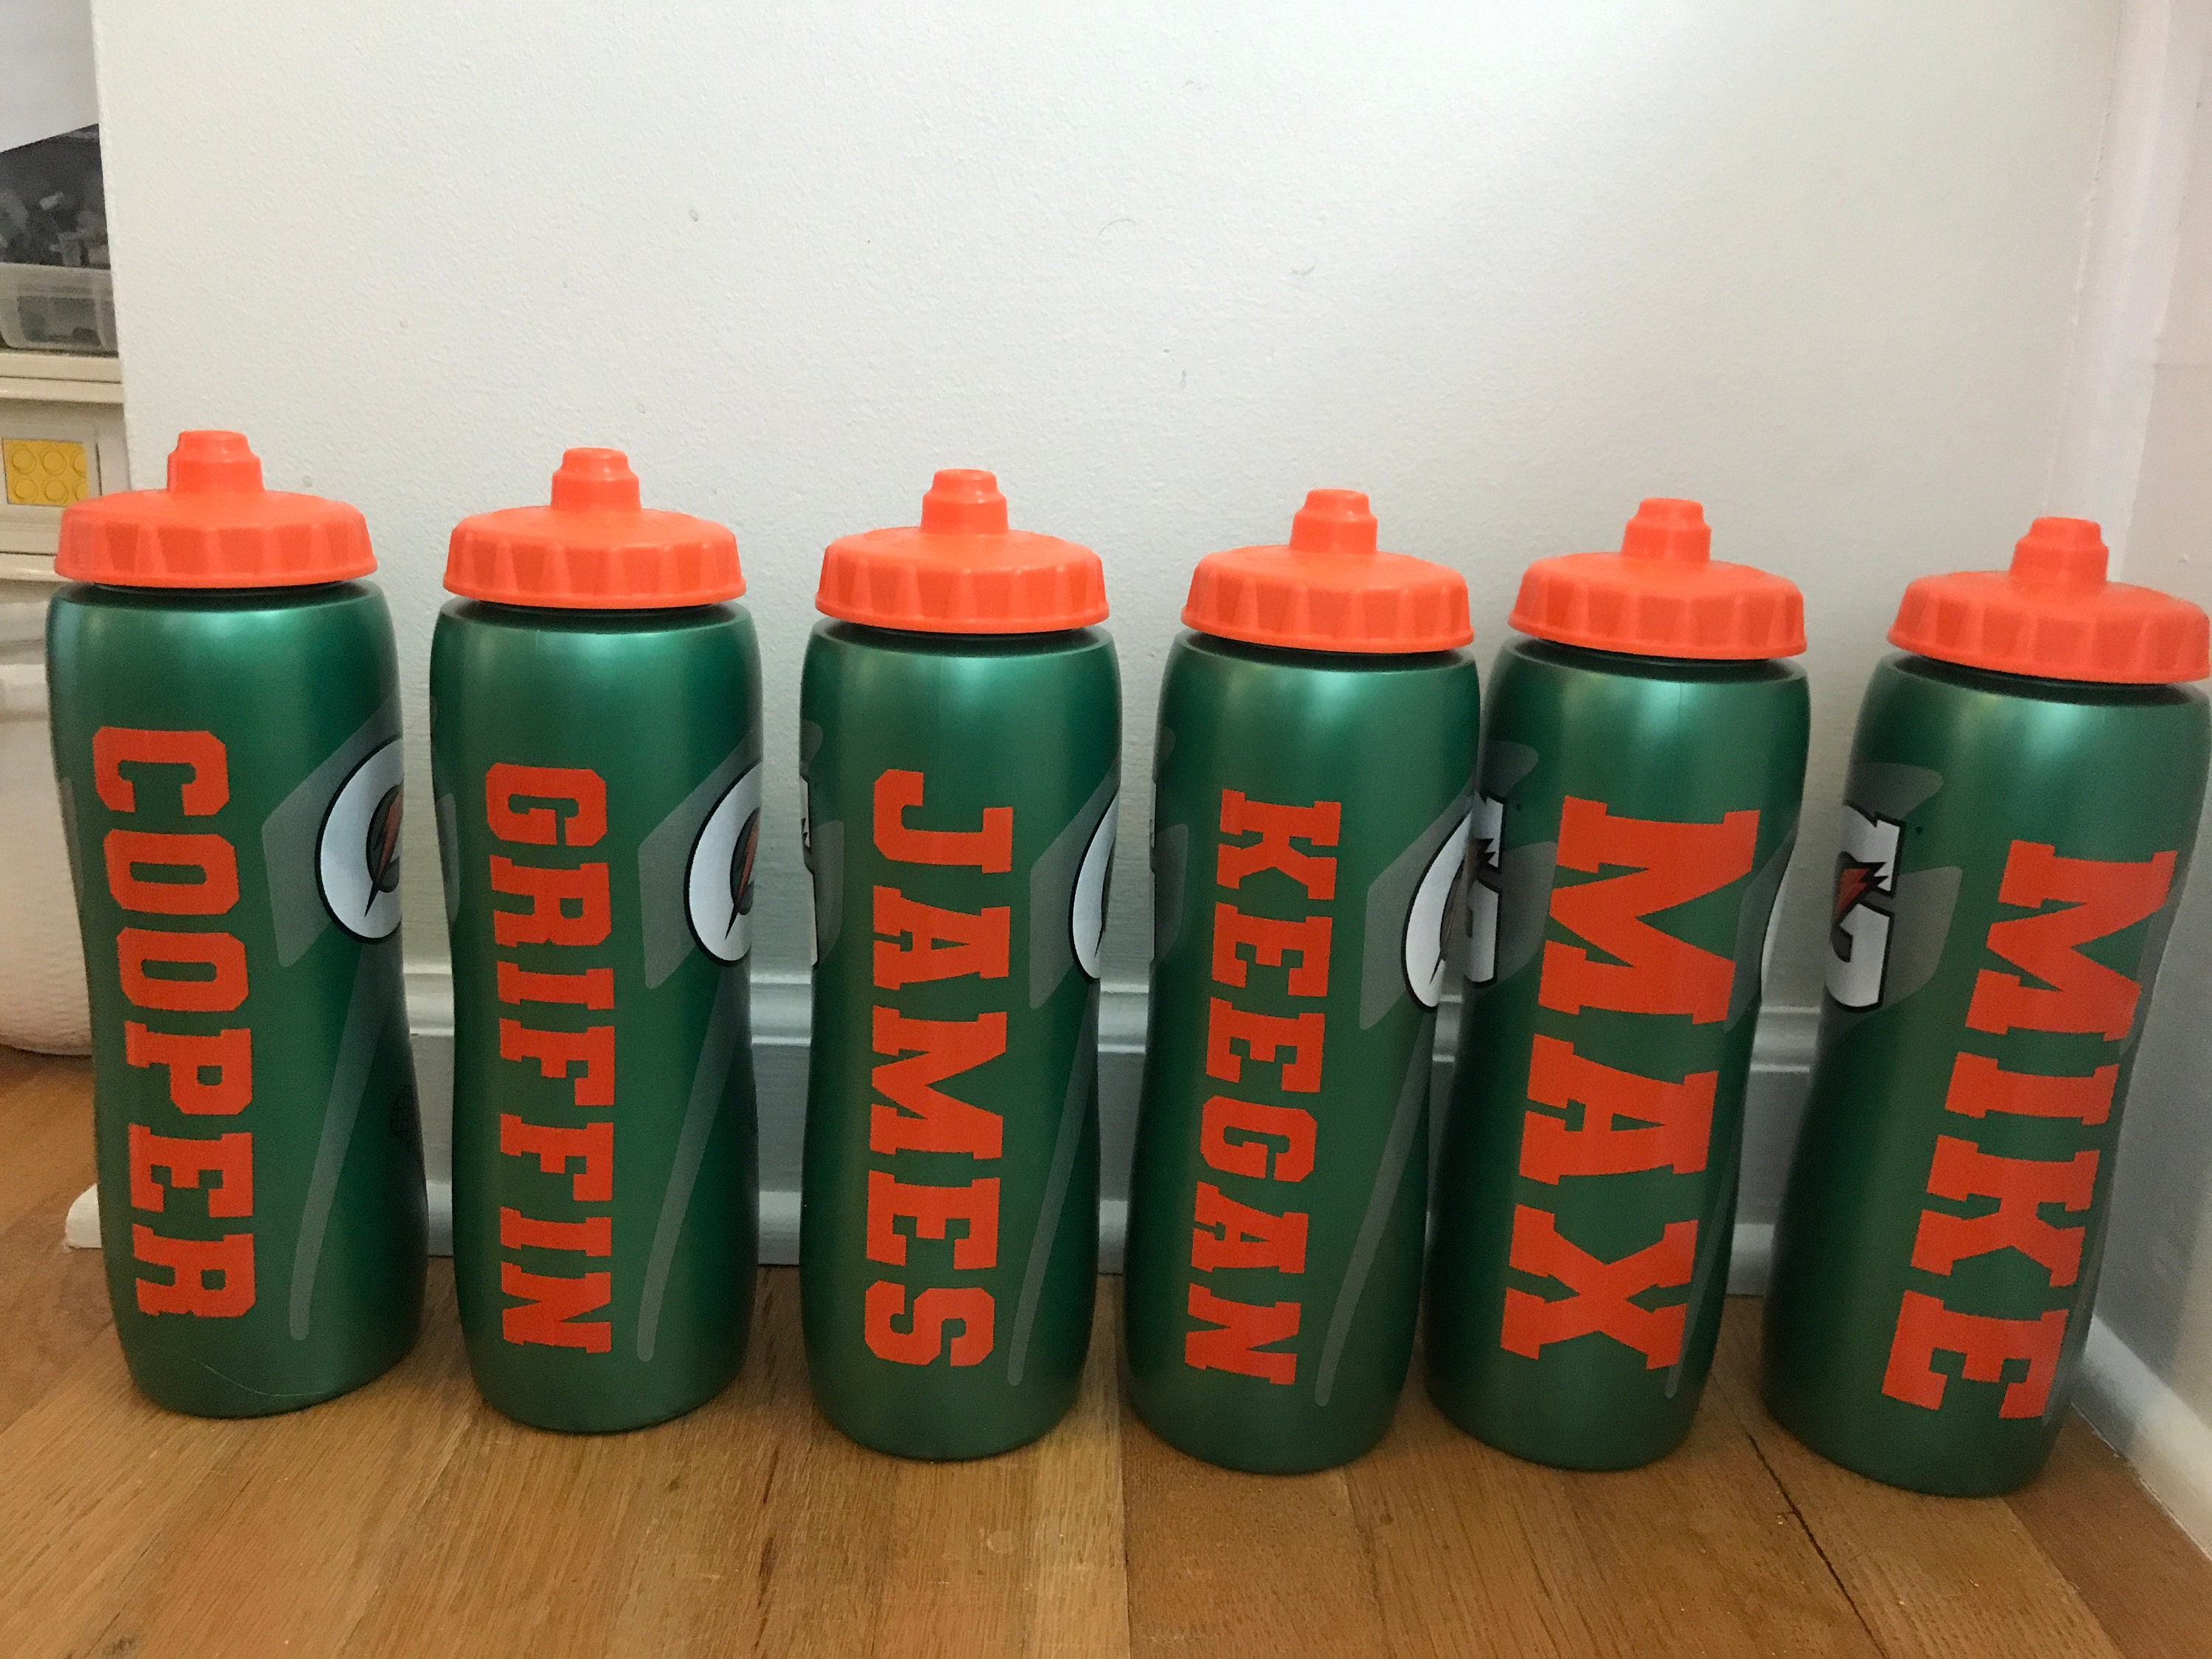 Gatorade Water Bottle Decal Name Lable. Sports Water Bottle 